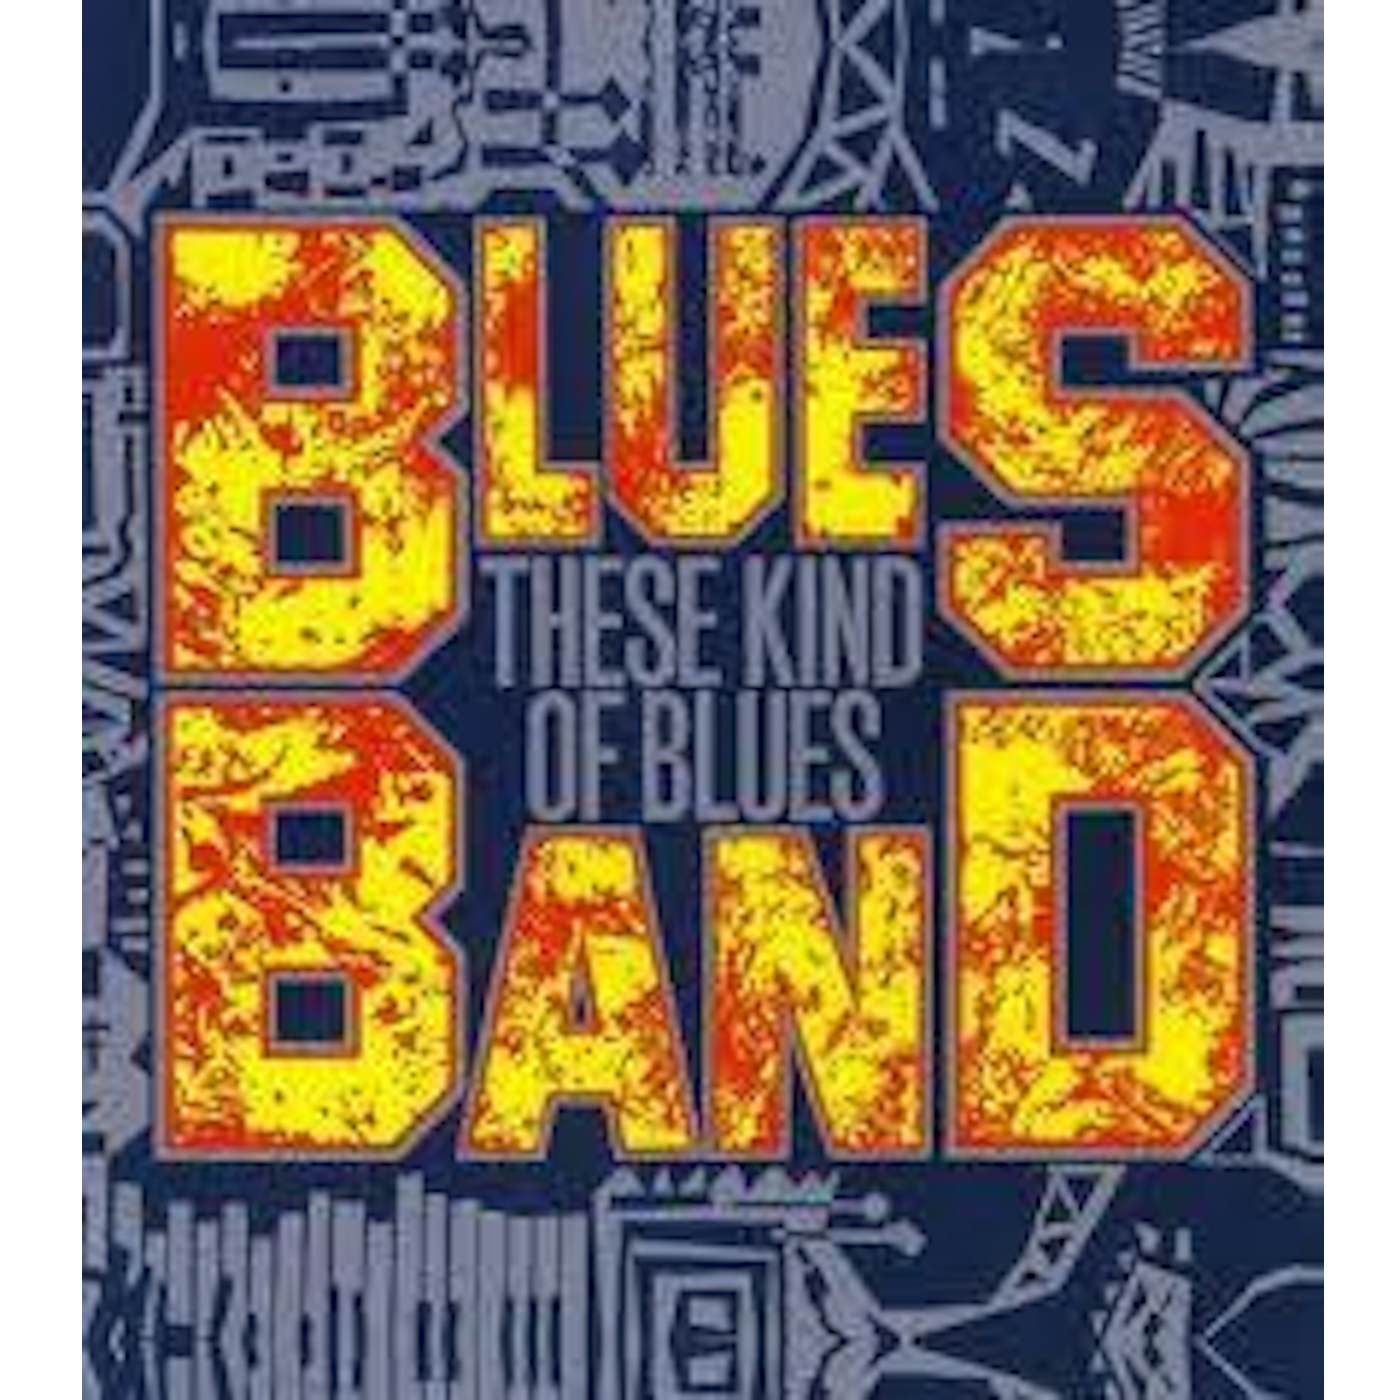 The Blues Band THESE KIND OF BLUES CD